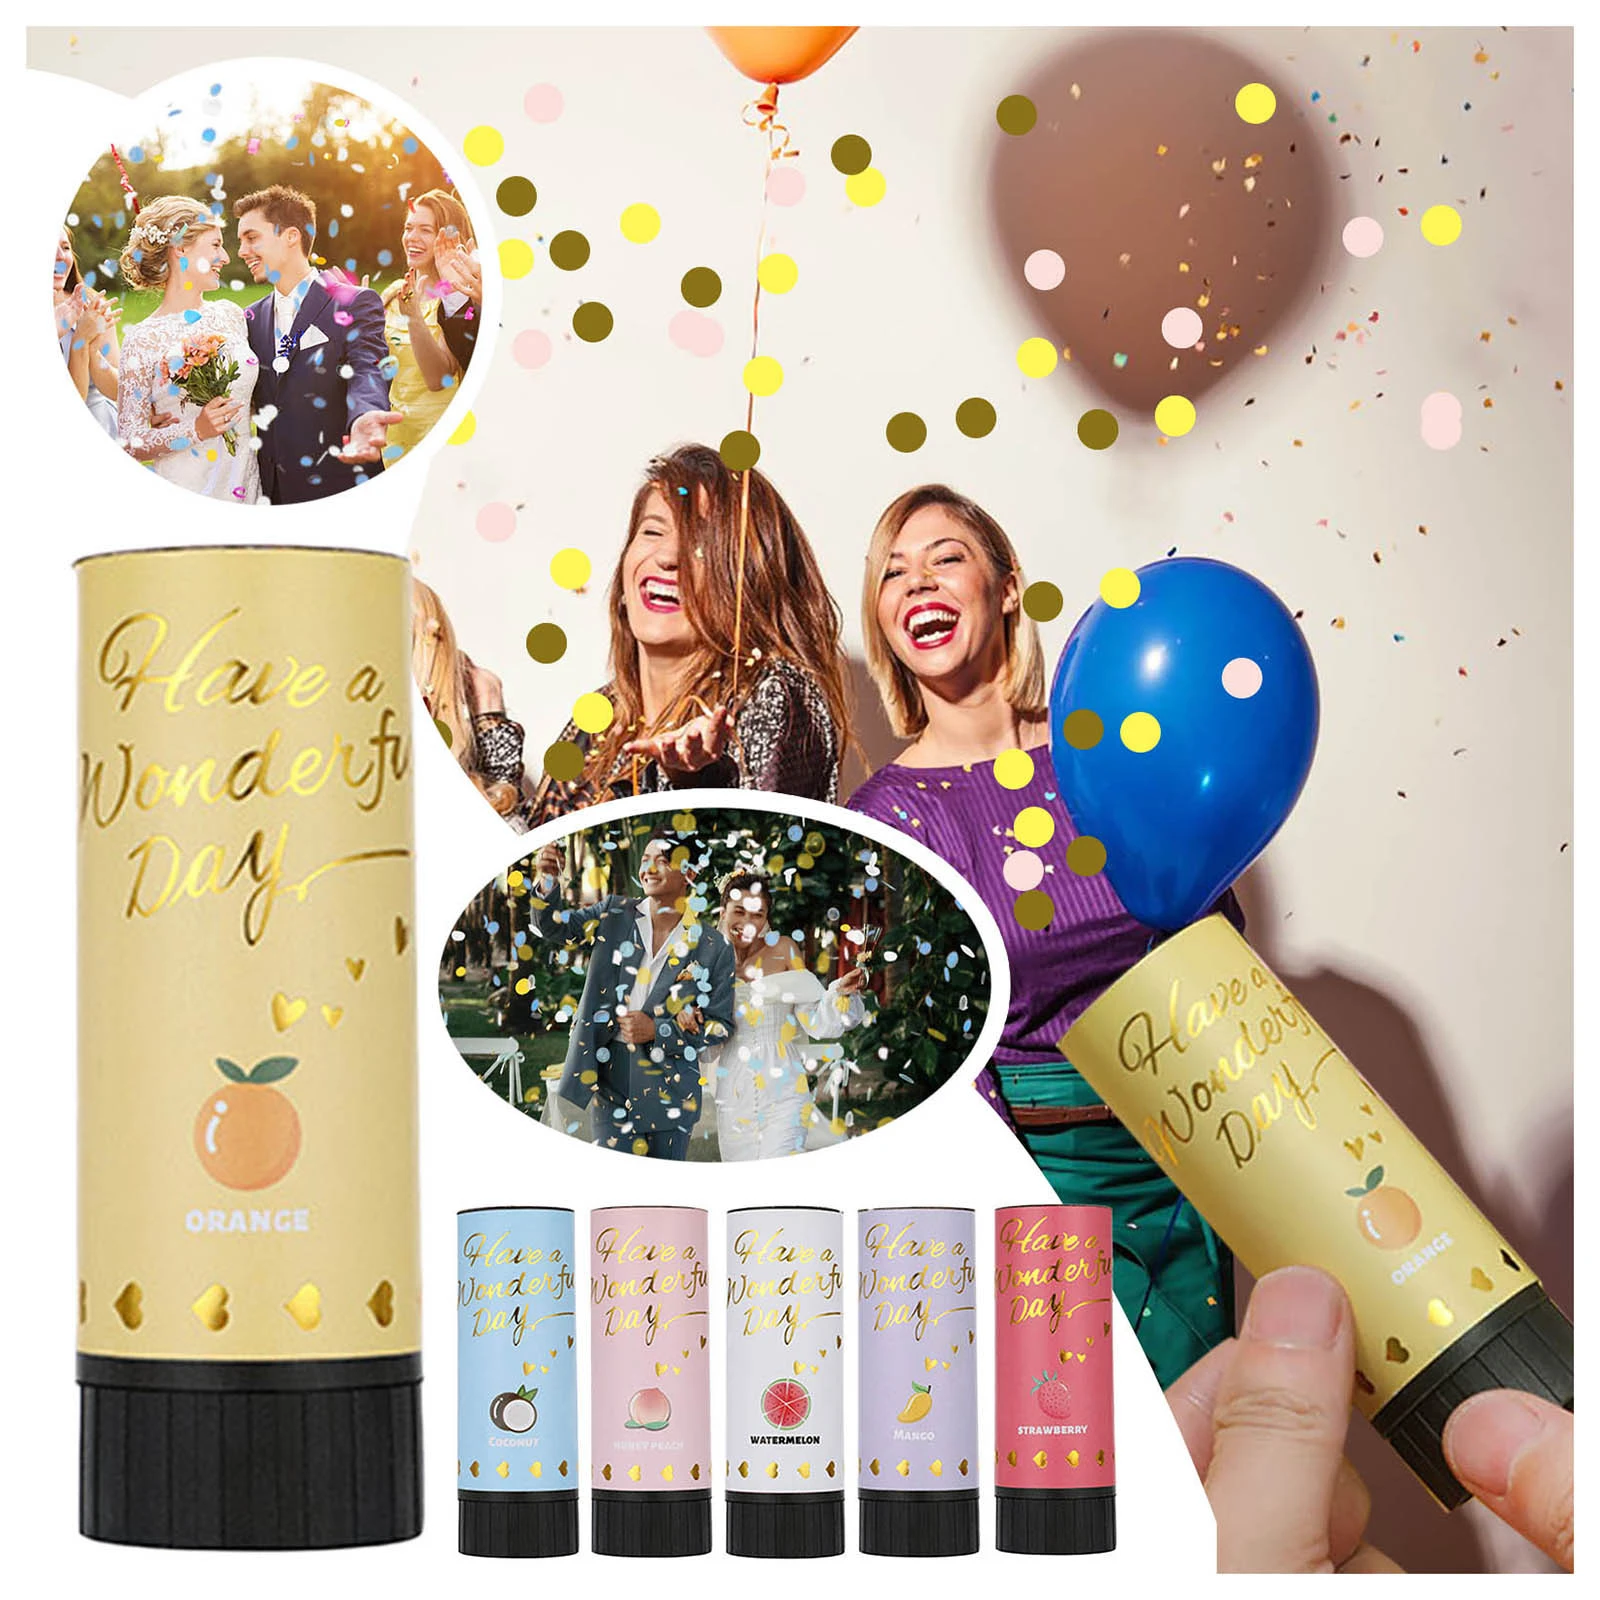 Vervagen krassen aanraken Confetti Cannons Wedding Birthday Party Confetti Shooters Fruit Scent  Festive Atmosphere Supplies - Party & Holiday Diy Decorations - AliExpress